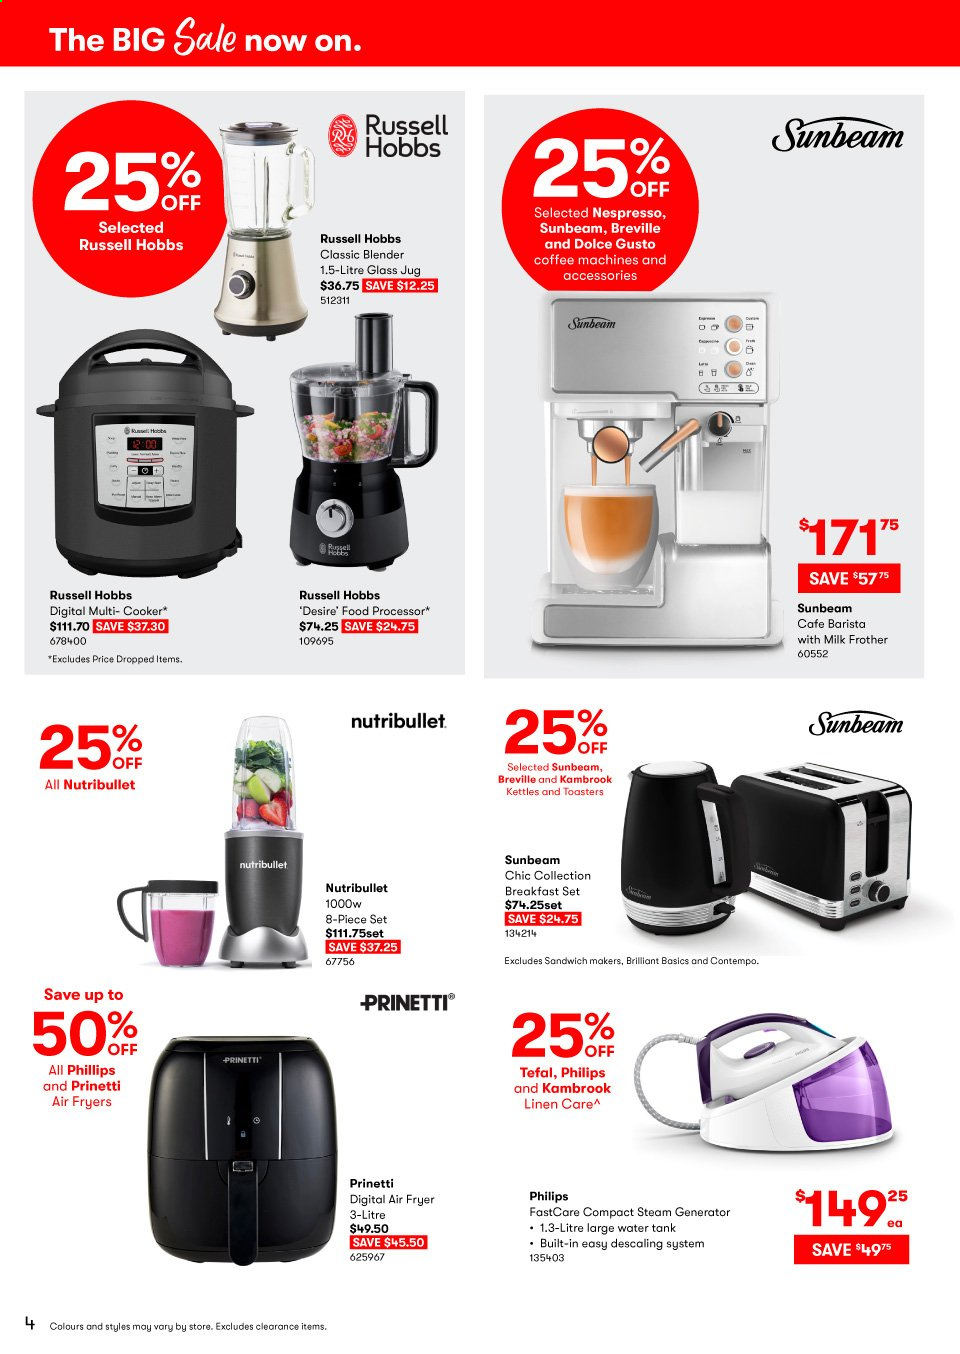 thumbnail - BIG W Catalogue - 27 May 2021 - 9 Jun 2021 - Sales products - Philips, Tefal, Sunbeam, tank, Prinetti, Nespresso, Dolce Gusto, Kambrook, blender, air fryer, NutriBullet, Russell Hobbs, food processor, milk frother. Page 4.